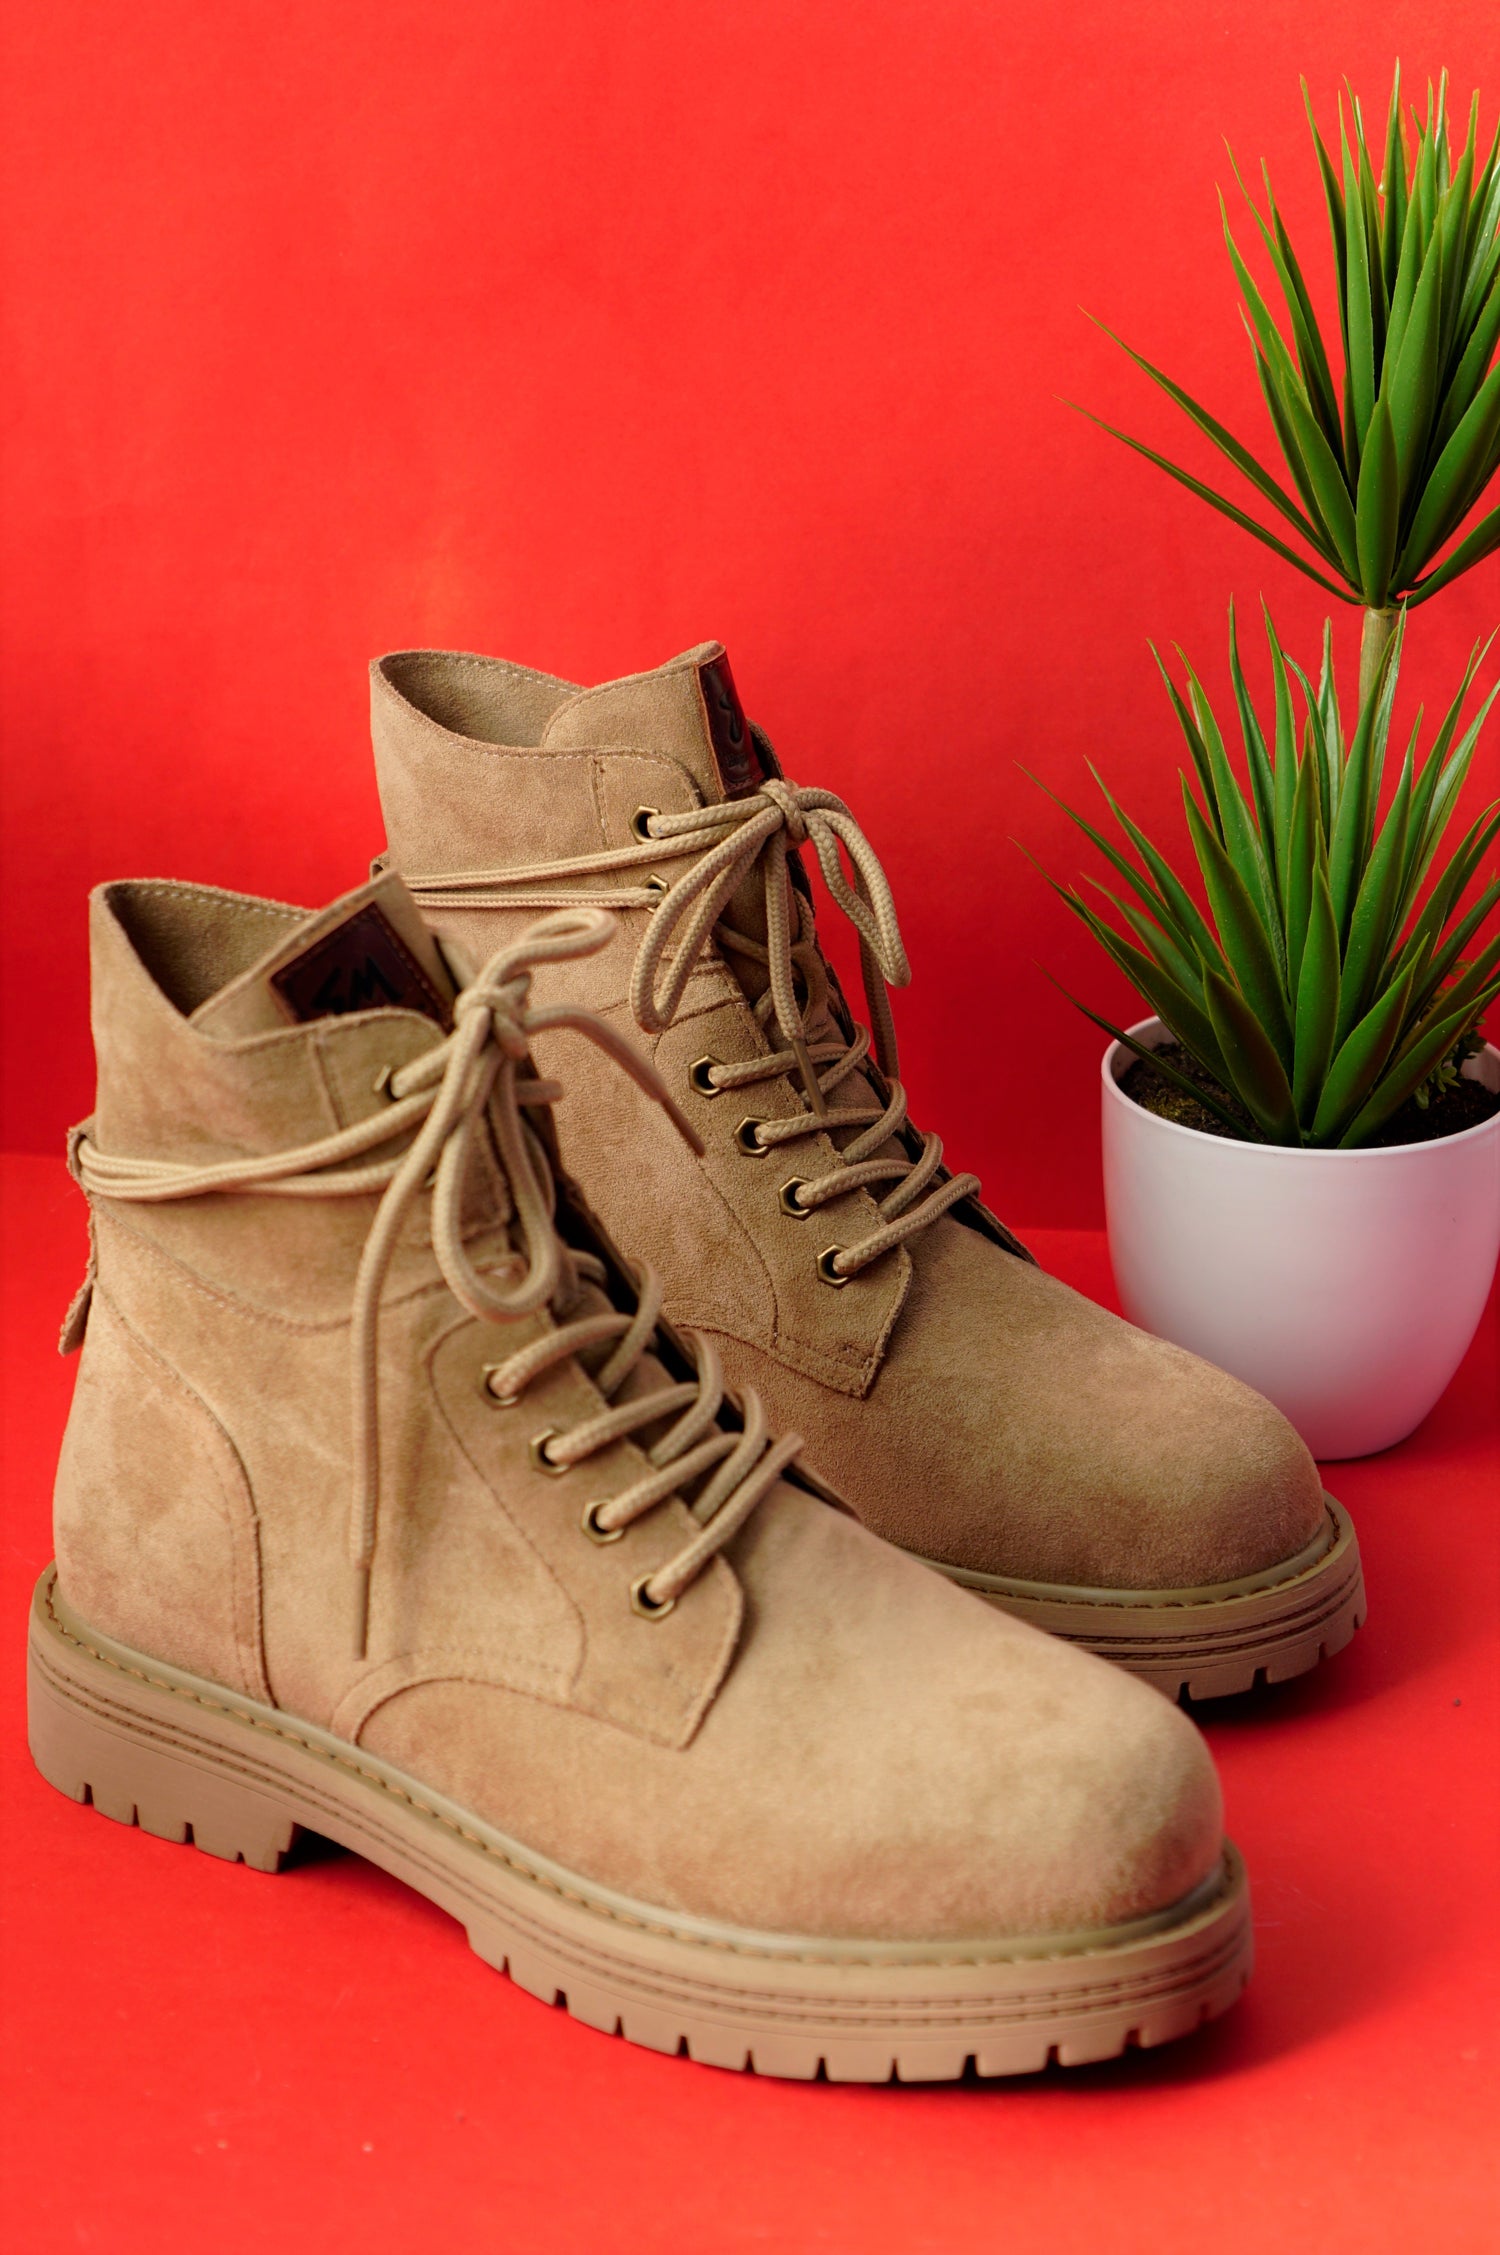 Unisex Suede Leather Hiking Ankle Boots - Eugenia Molina